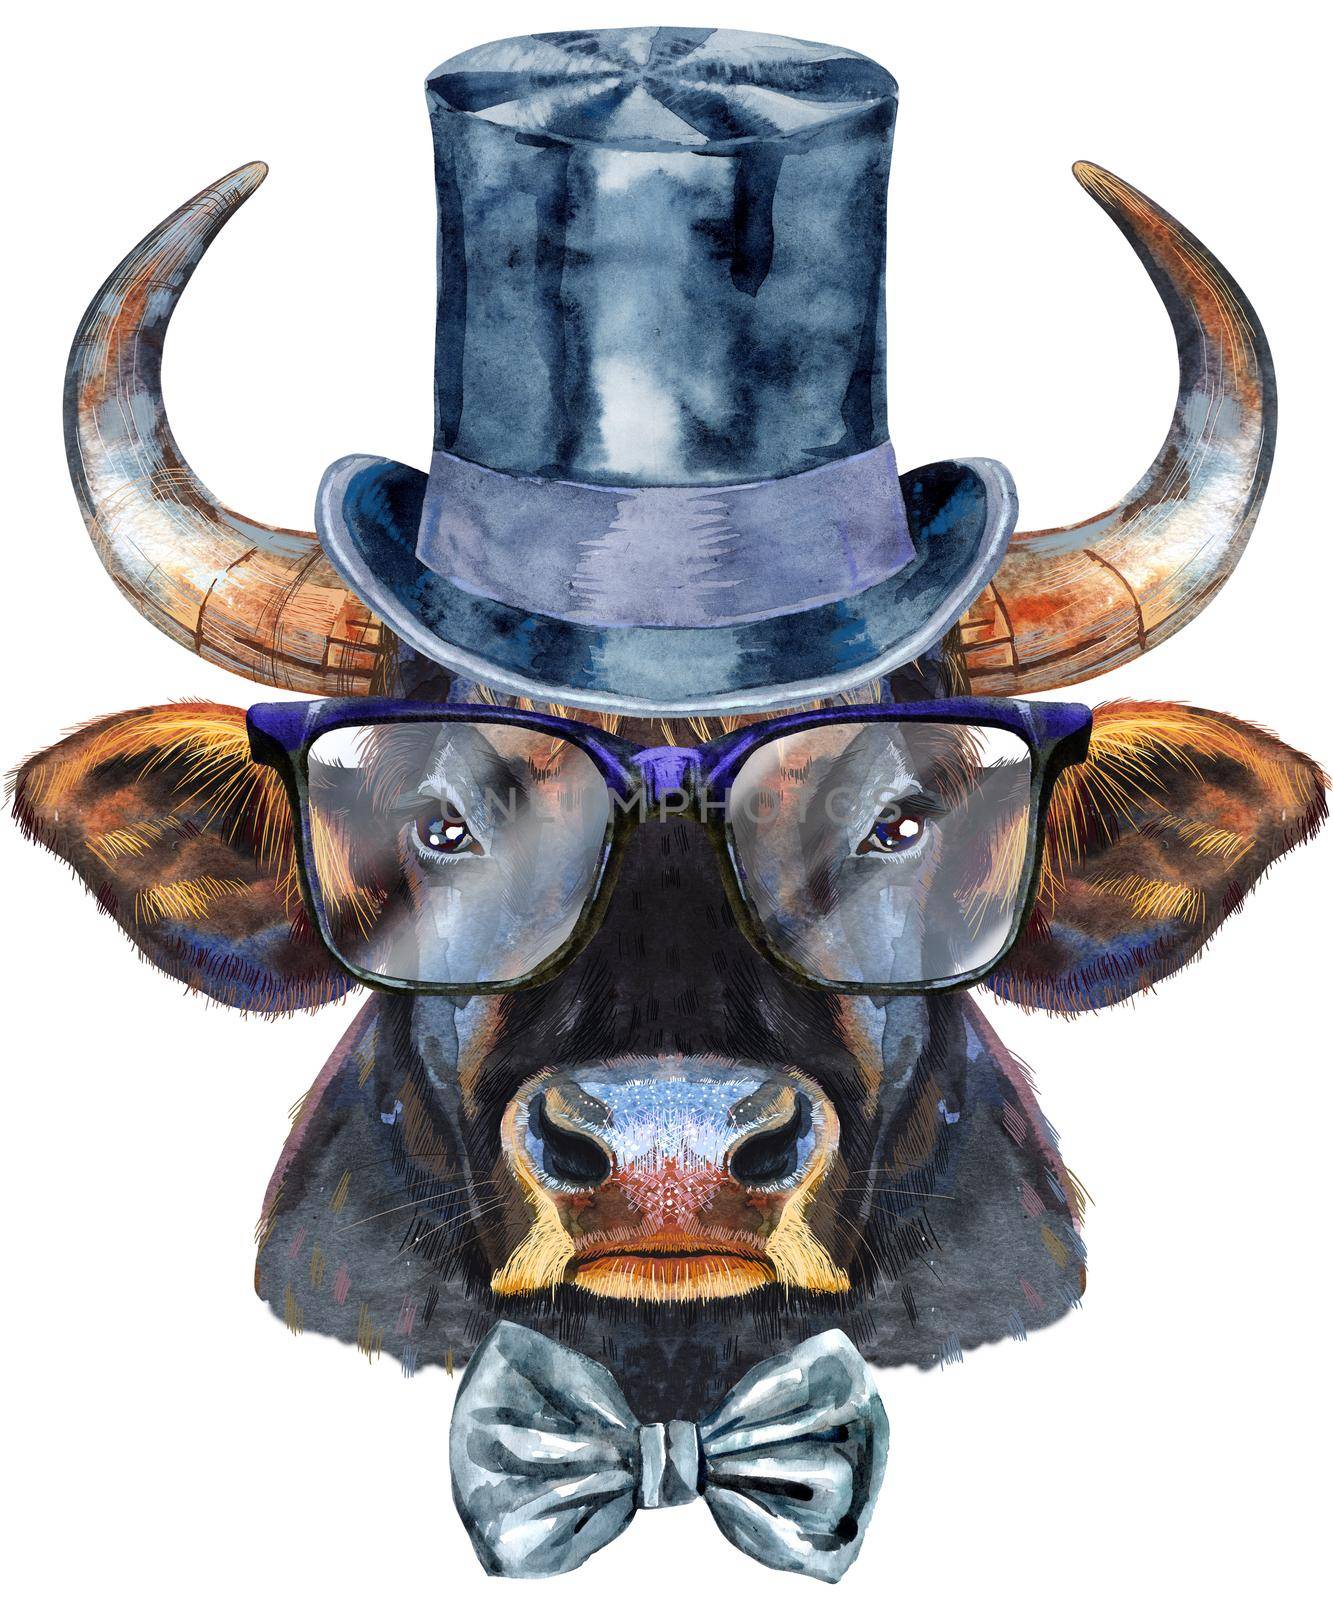 Bull watercolor graphics. Bull animal illustration watercolor textured background.